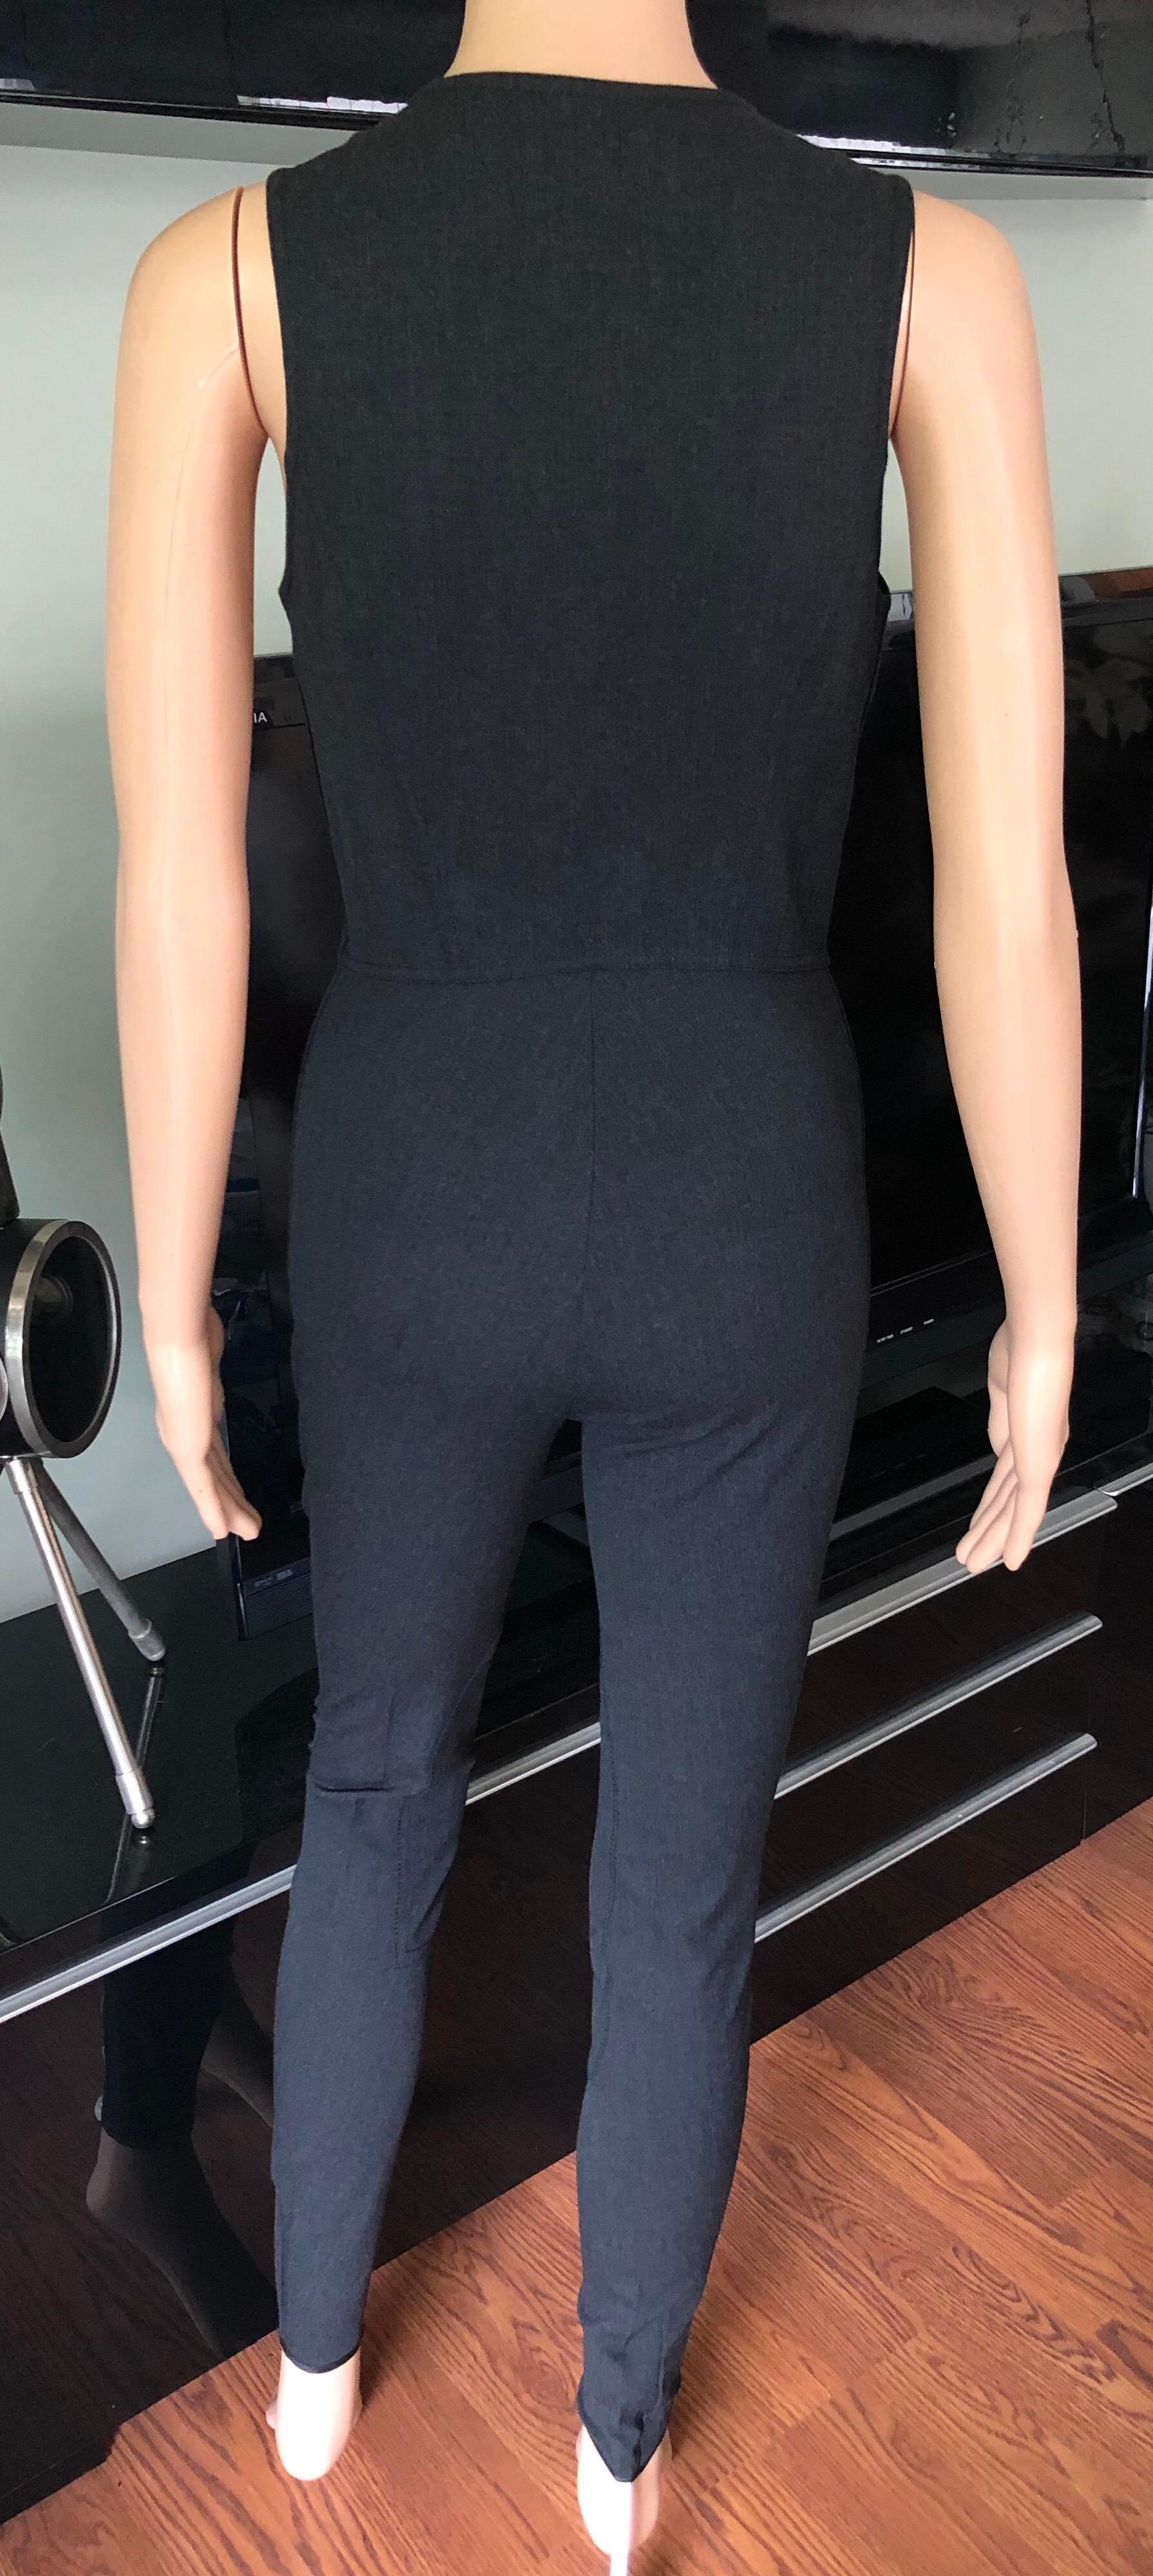 Tom Ford for Gucci S/S 1993 Runway Vintage Zipper Jumpsuit In Excellent Condition For Sale In Naples, FL